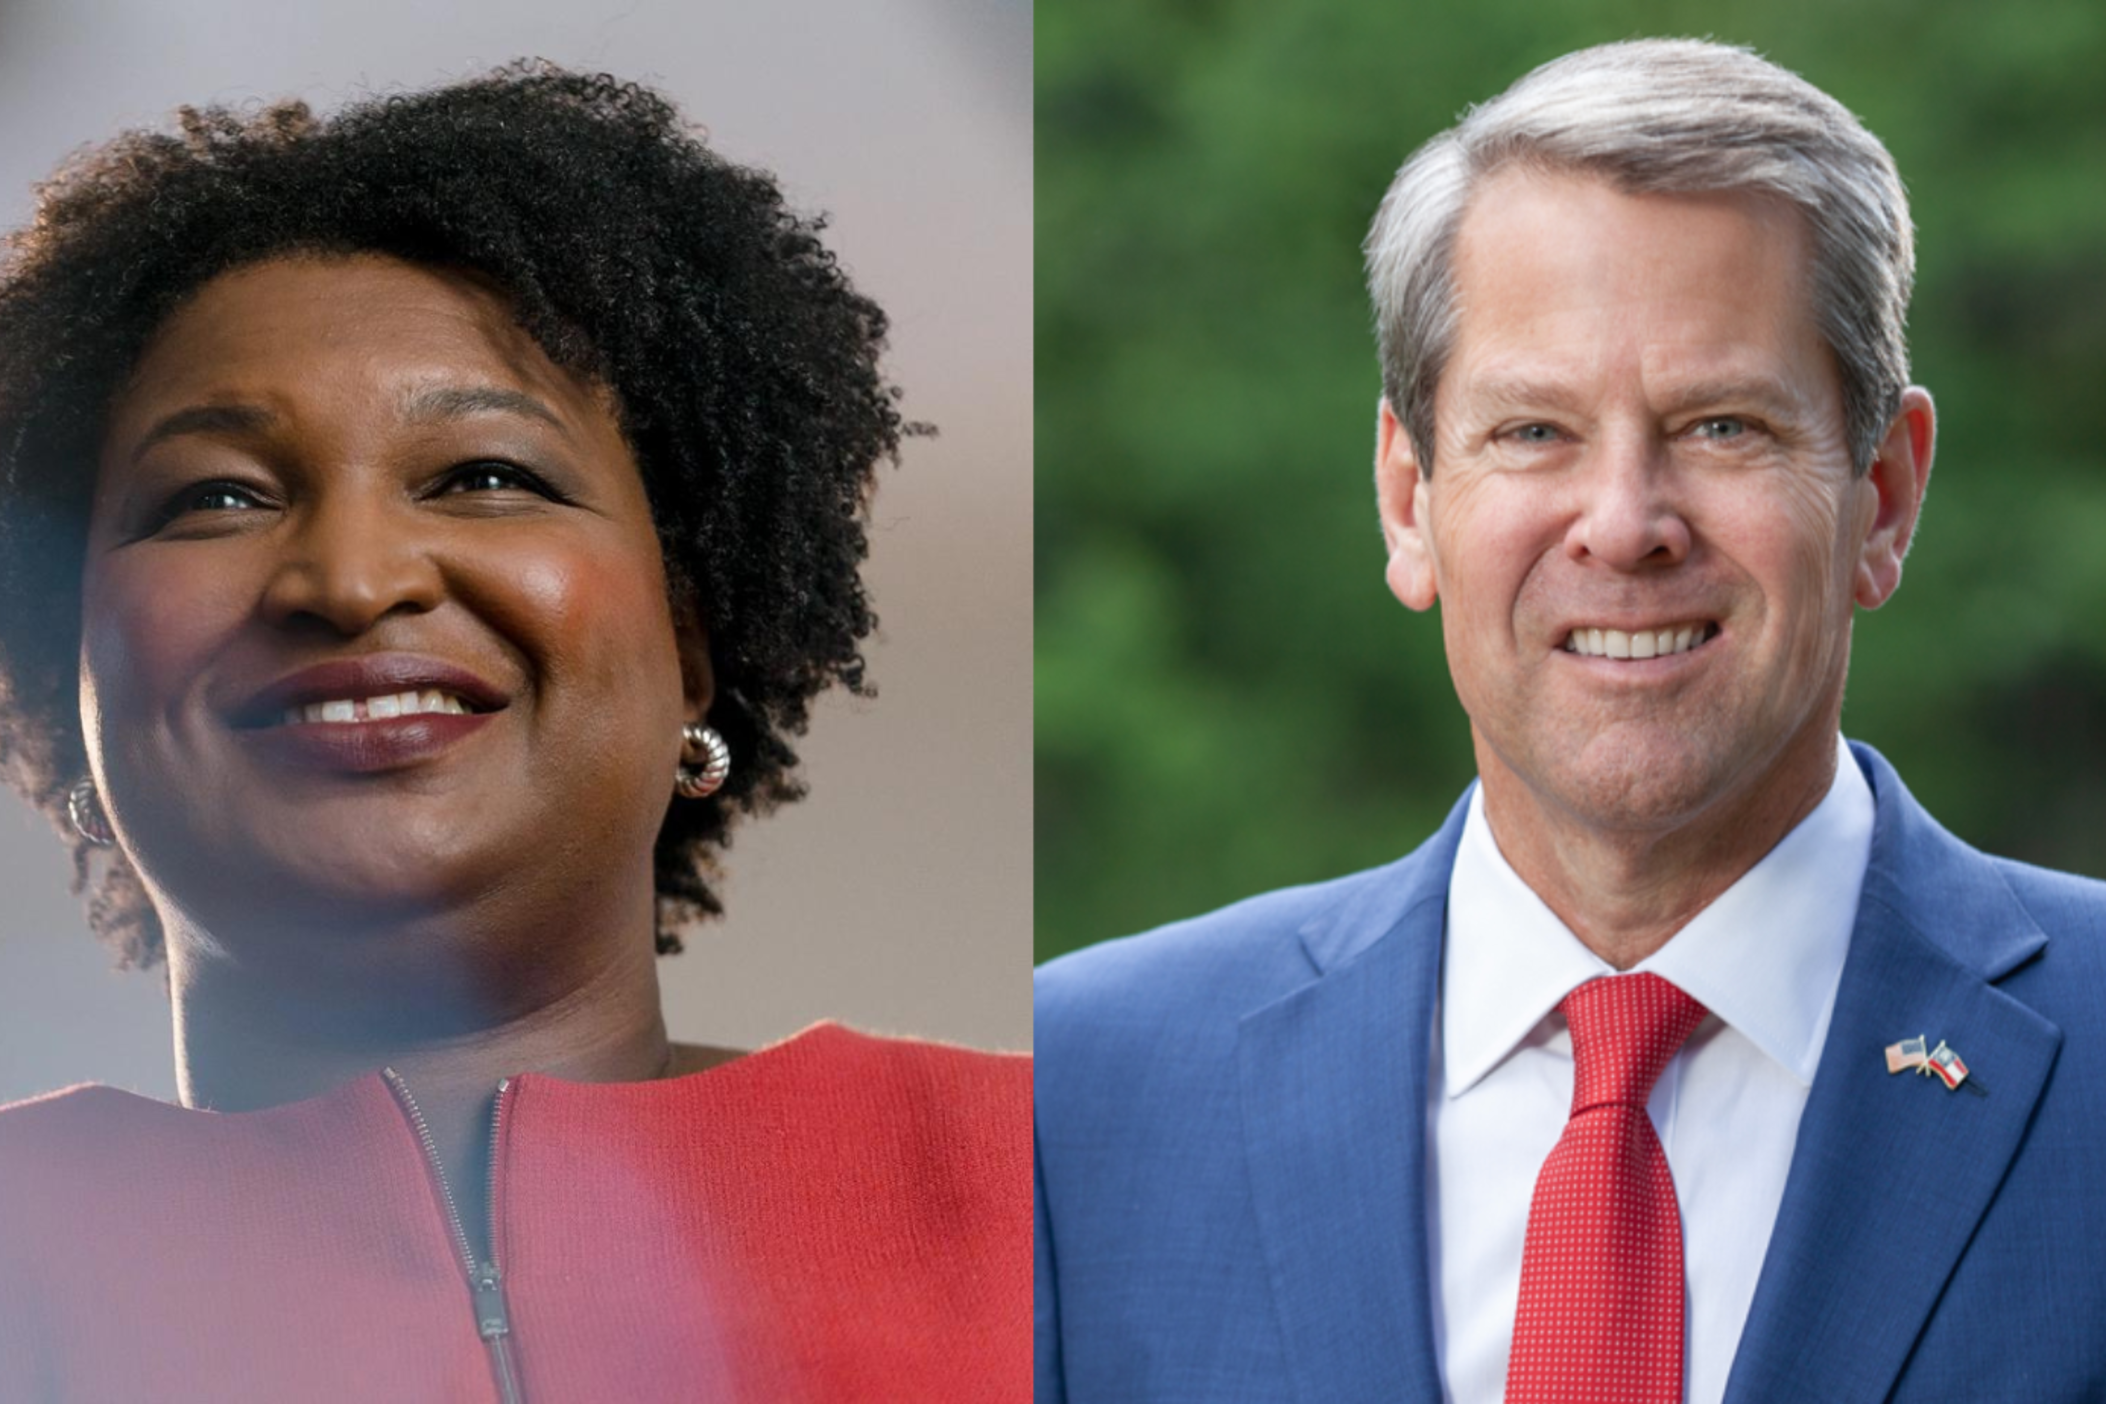 A split image with headshots of Stacey Abrams and Brian Kemp